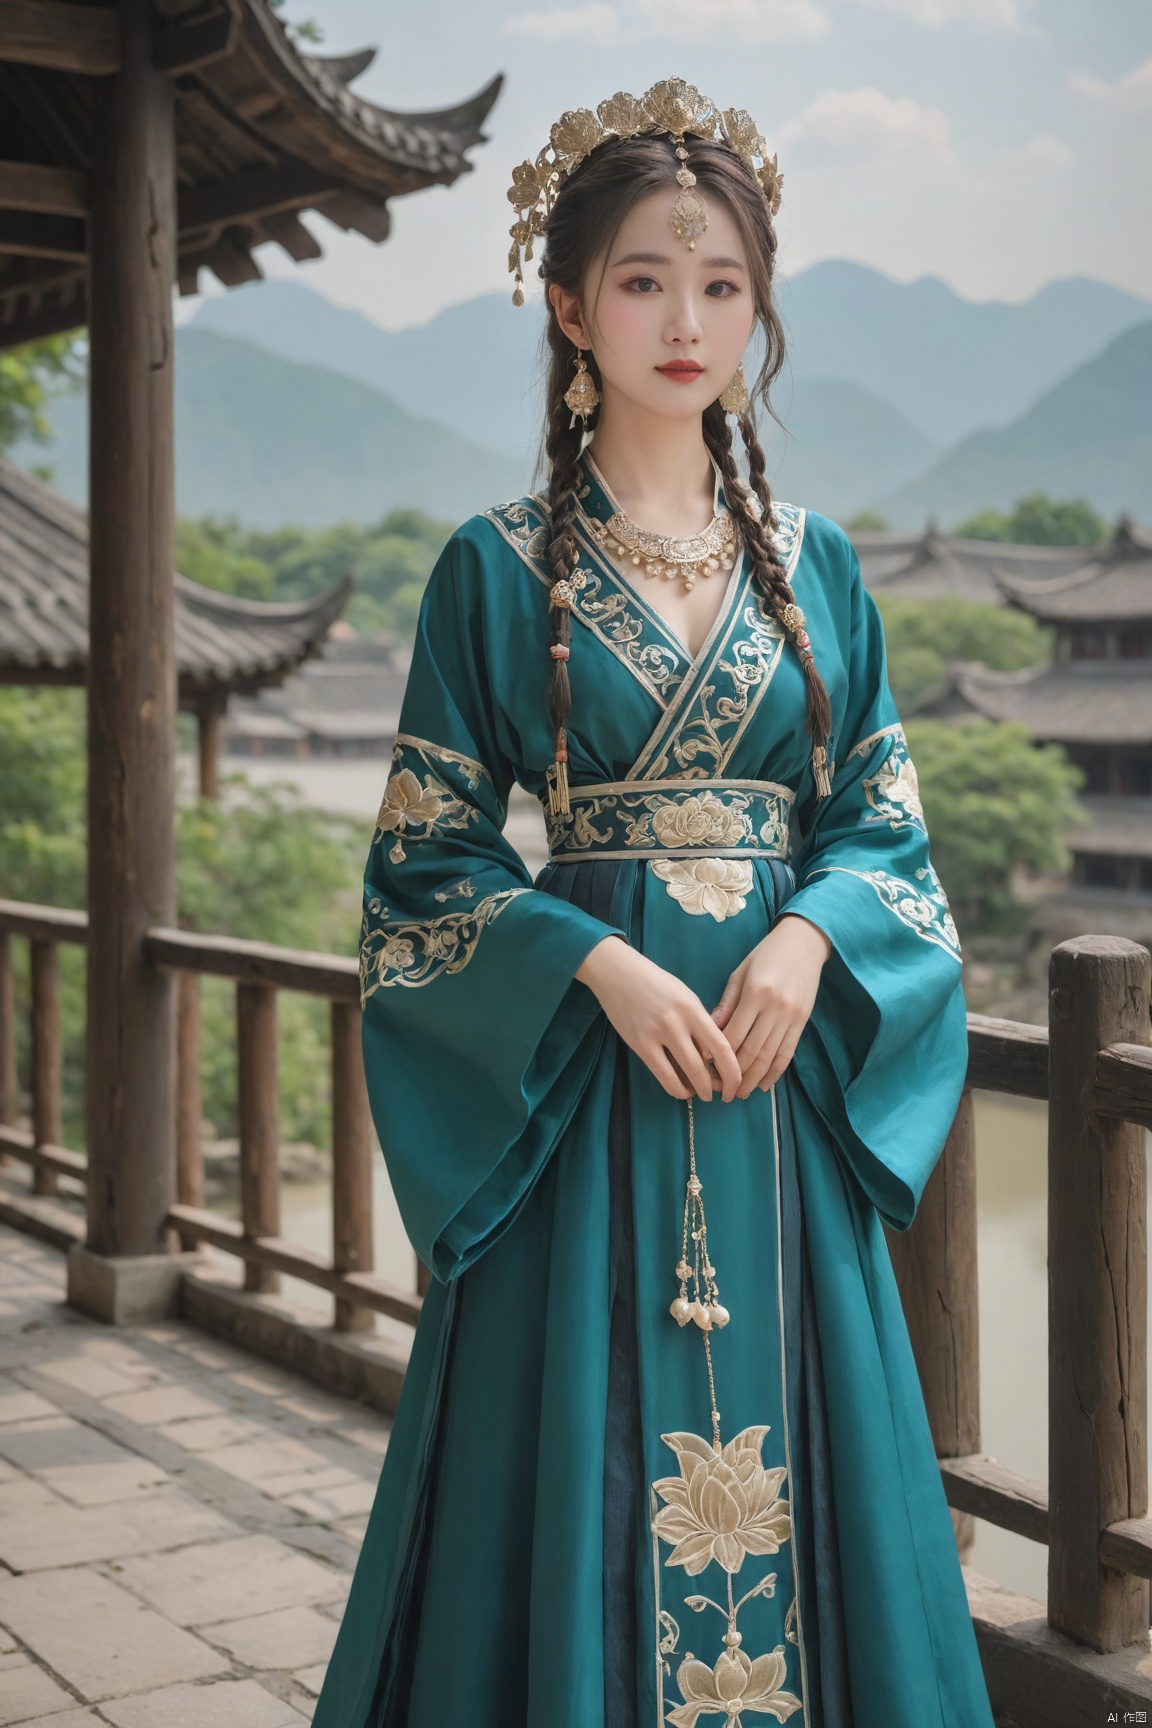  Detailed high, high precision, high quality, the UHD, 16 k, rich details, abundant element, shows that a girl, beautiful, lotus, lotus leaf, pearlygates, traditional clothing, clothing patterns, miao clothing headwear, Face Score, MAJICMIX STYLE, arien_hanfu, monkren,full-length mirror,Breast, huge,Dramatic clouds, mountains, rivers, ancient buildings,Guilin landscape, Guilin, Hangzhou,Sunny,shoes,,full body, MEINV